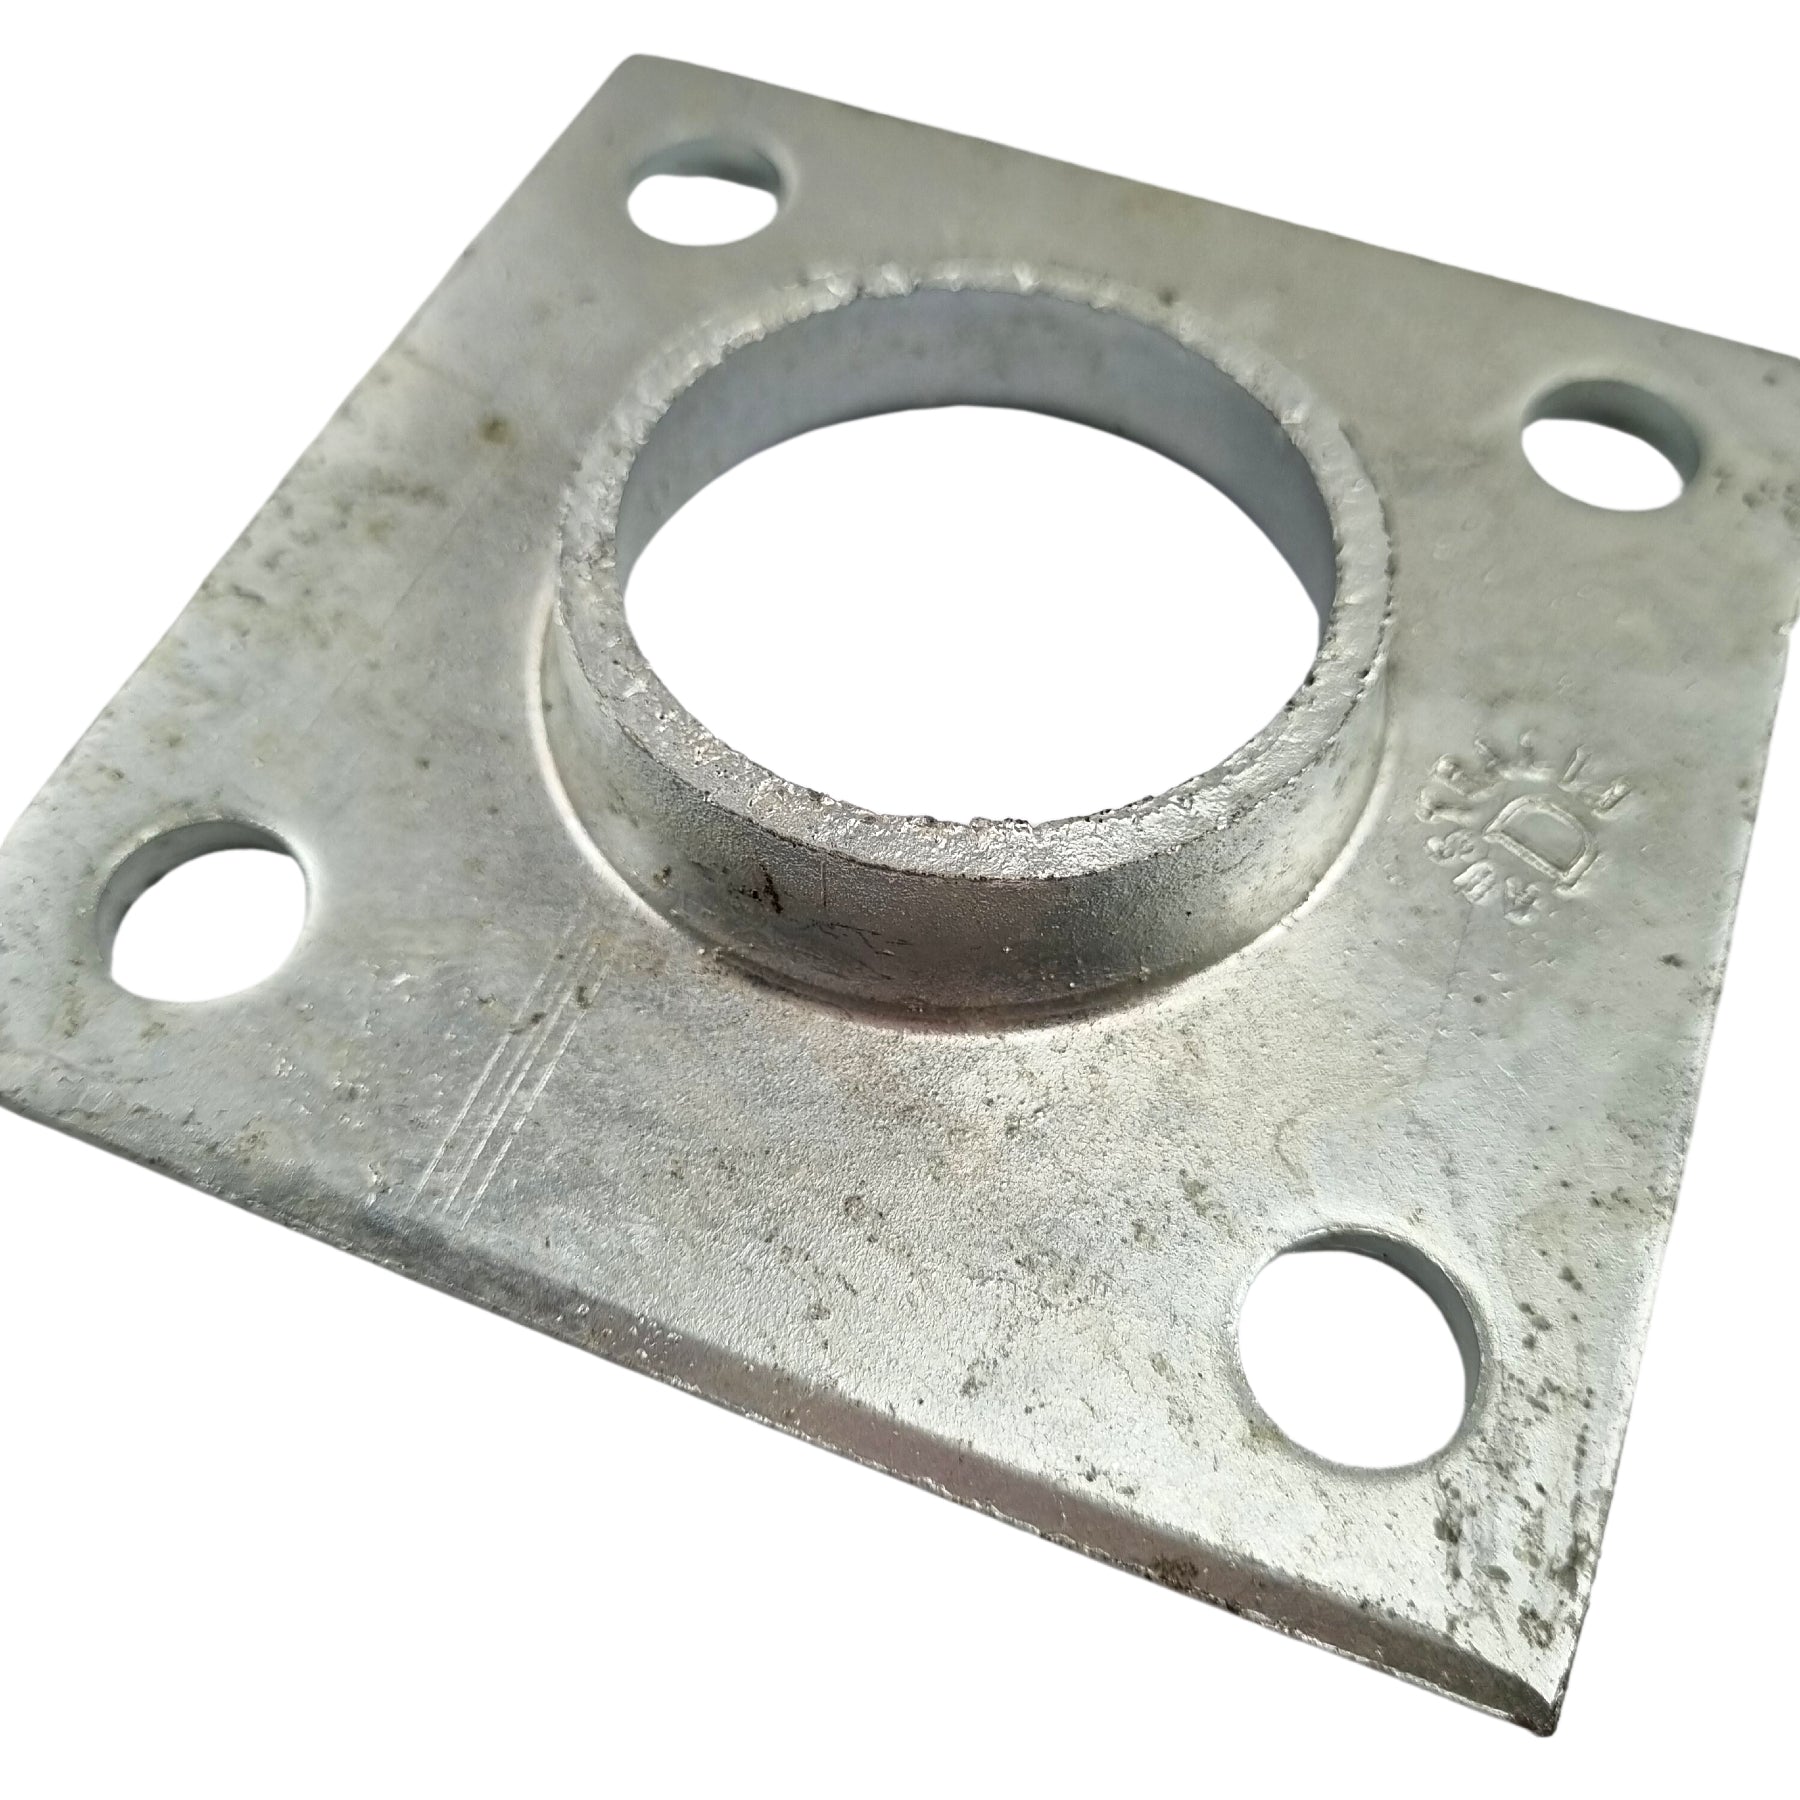 Square Flange Heavy Duty Galvanised. Australian made. Shop fence & gate fittings online chain.com.au. Australia wide shipping.